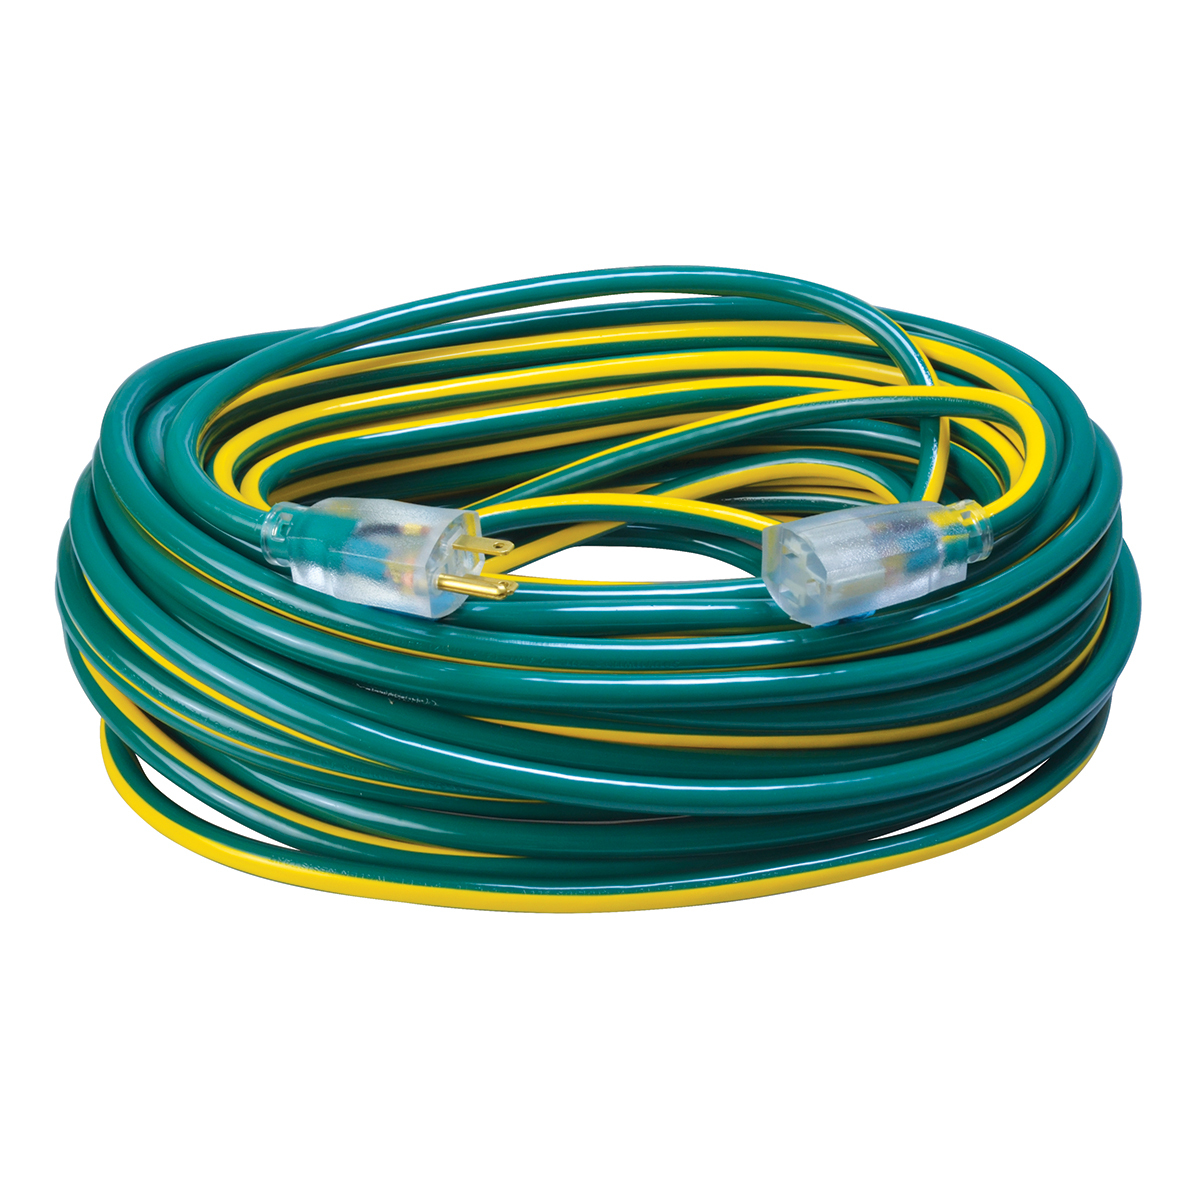 SOUTHWIRE, 12/3 SJTW 100' DARK GREEN/YELLOW OUTDOOR EXTENSION CORD  WITHPOWER LIGHT INDICATOR